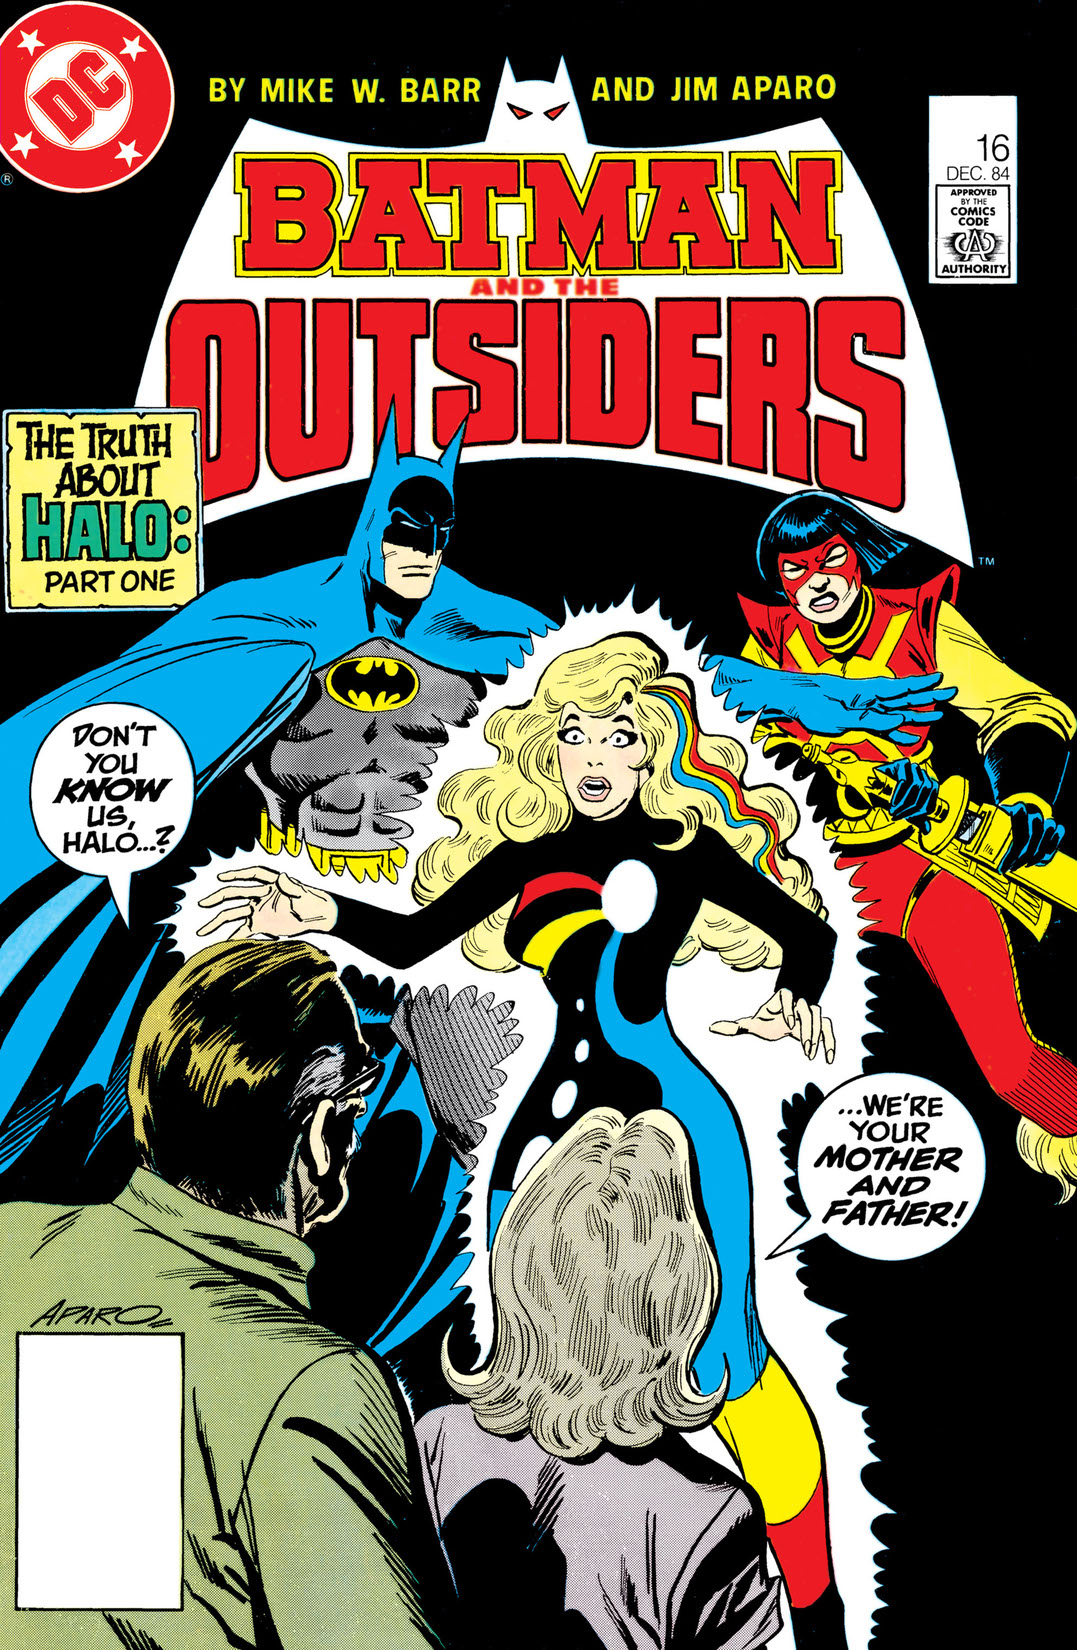 Batman and the Outsiders (1983-) #16 preview images